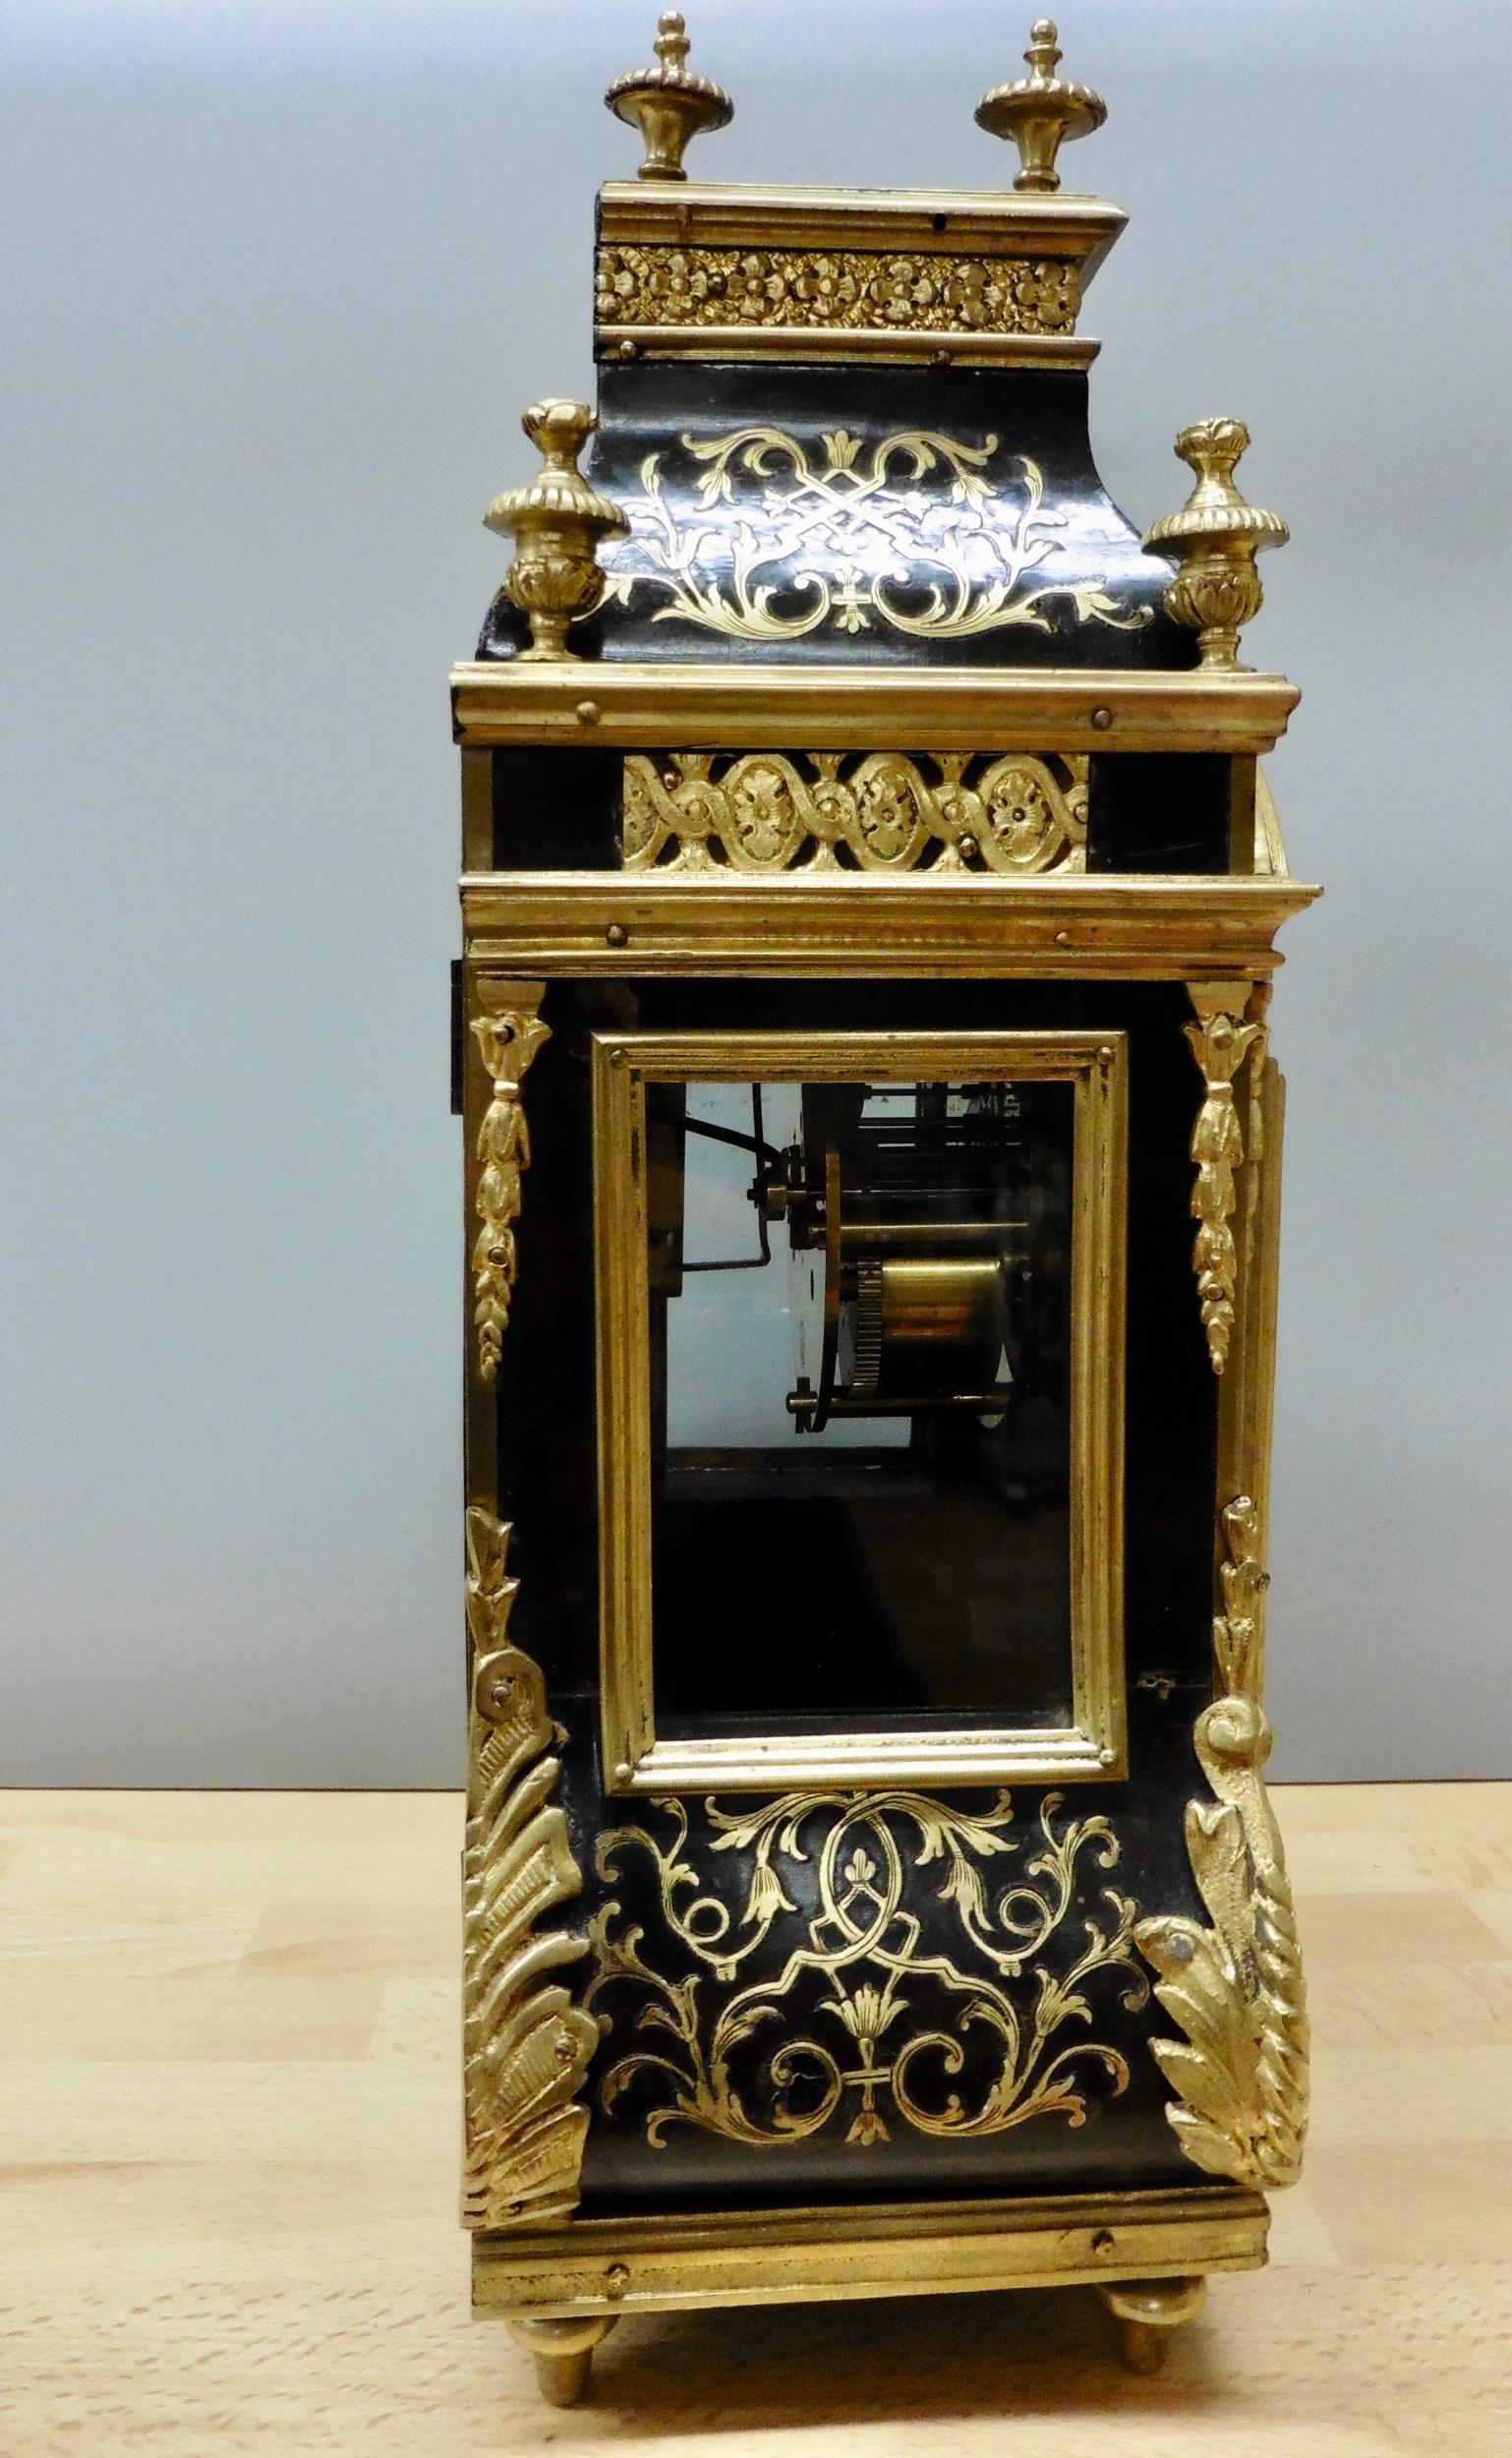 French Boulle Tortoiseshell mantel clock in a beautifully decorated ‘Bombe’ shaped case with ormolu mounts surmounted by eight gilded finials.

Brass bound side viewing windows, foliate cast mounts, the base edged with a gilt band divided by